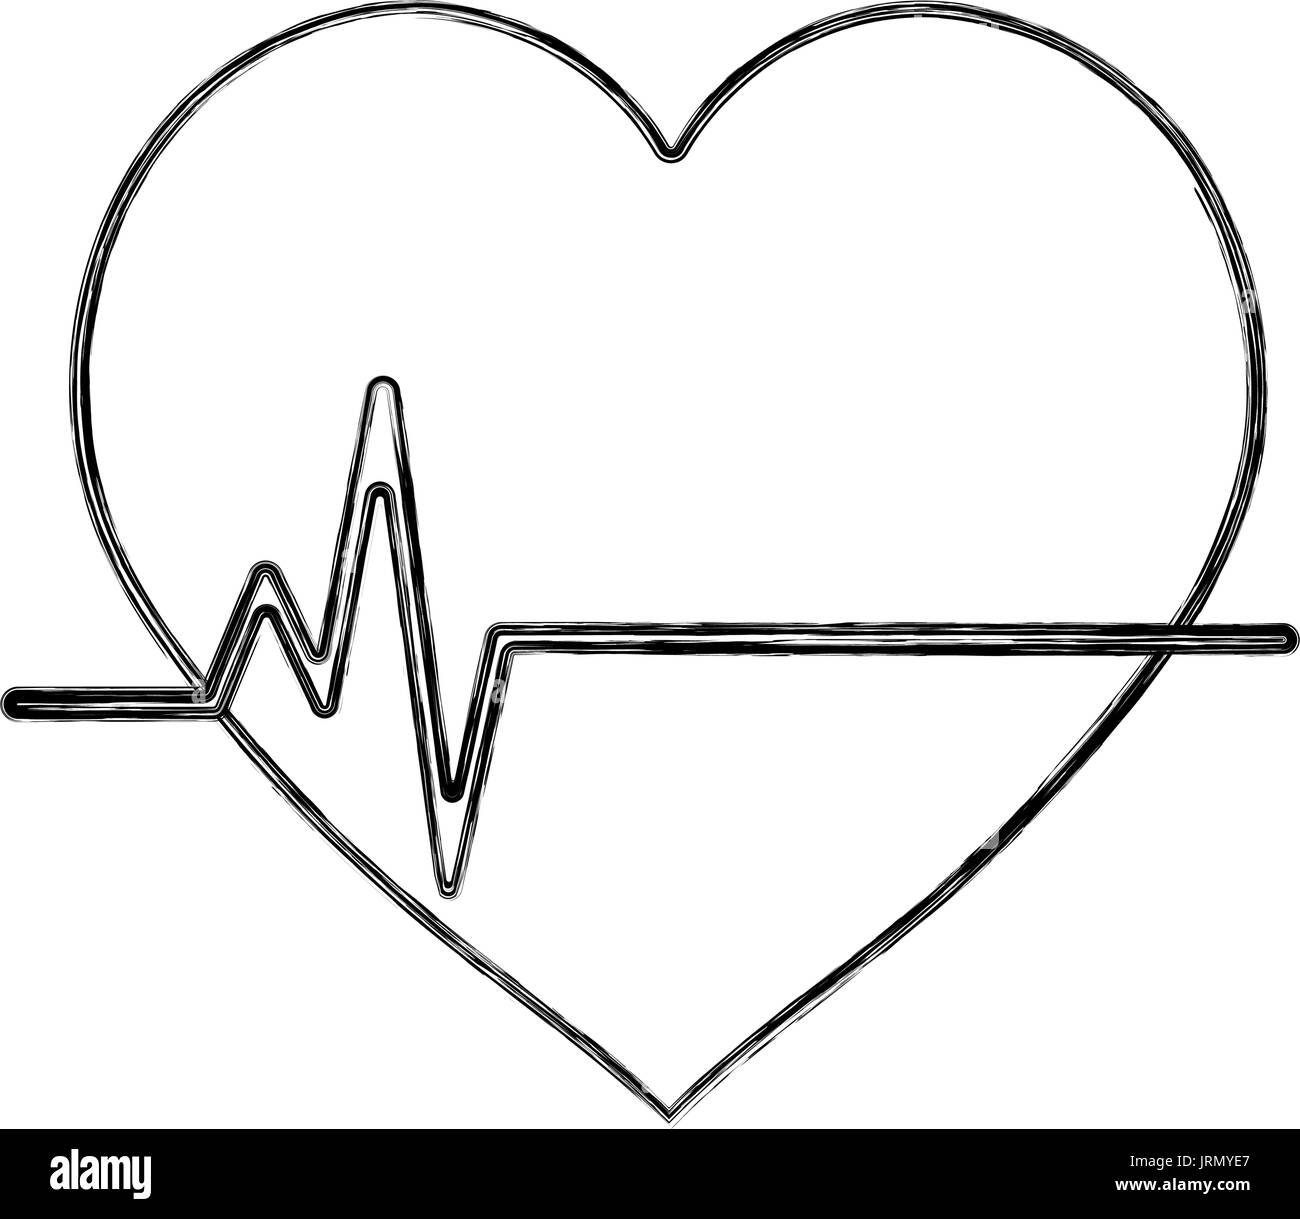 Cardiac cycle Black and White Stock Photos & Images - Alamy